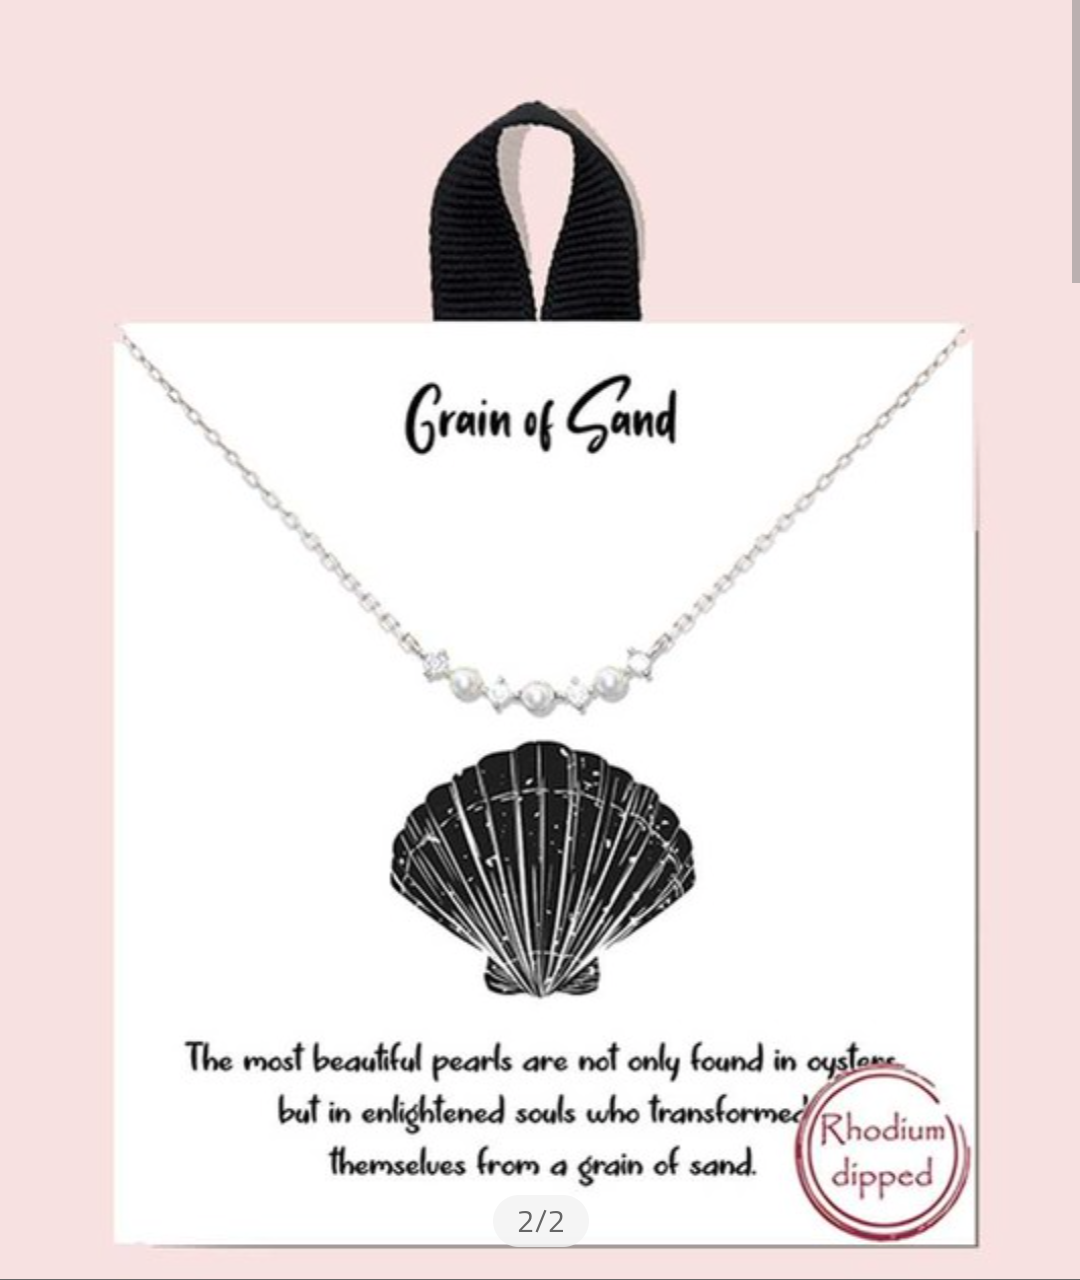 Grain of sand pearl necklace